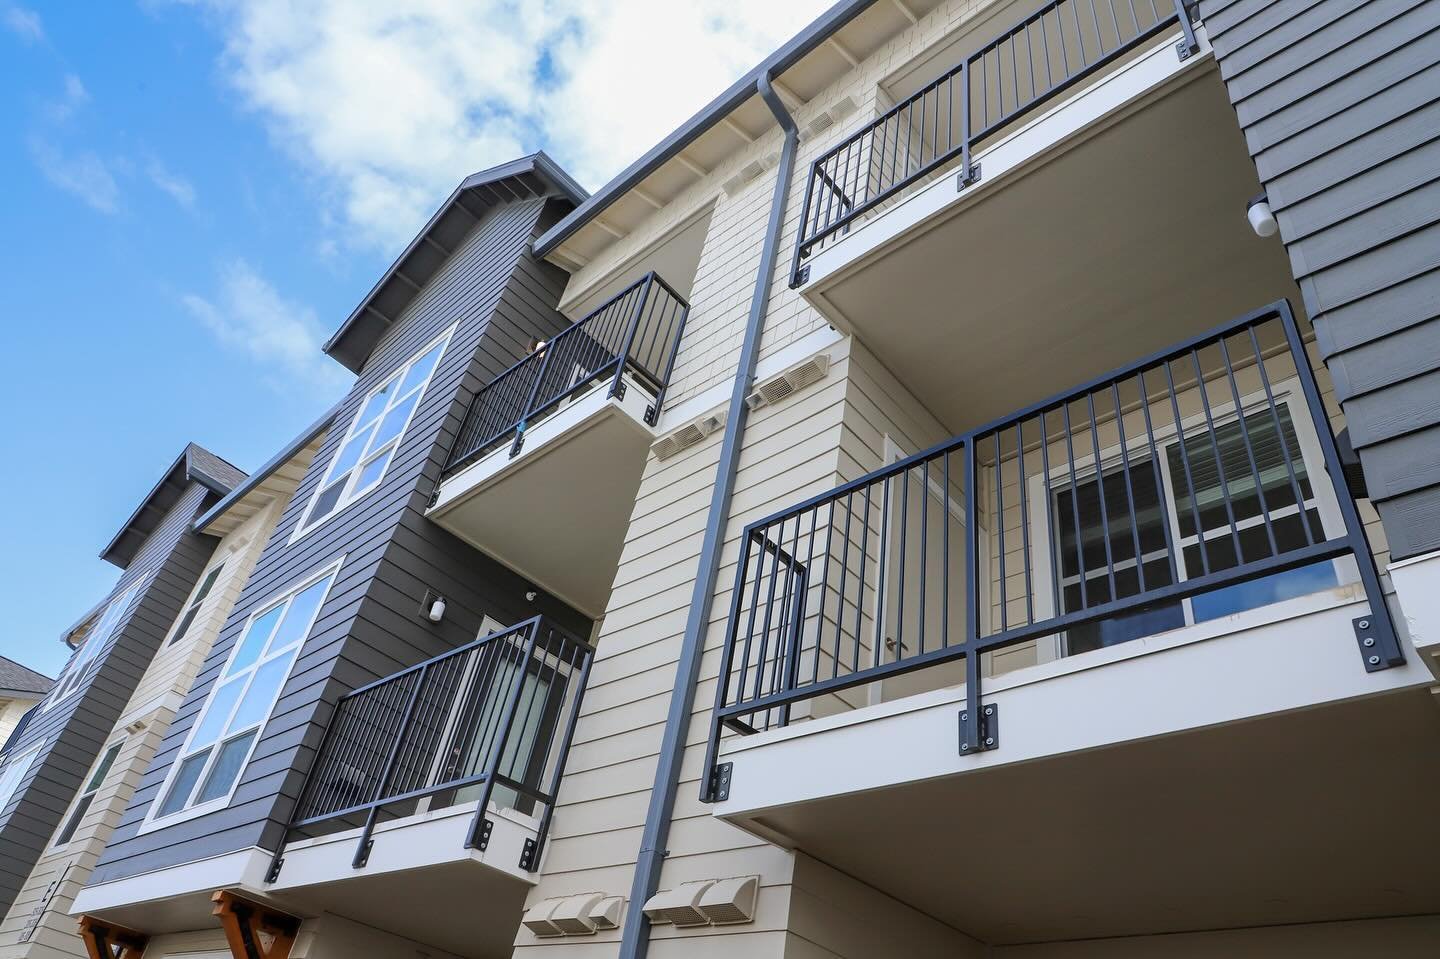 The durability and low maintenance requirements of metal railings can result in significant cost savings over the lifespan of your building. Reduced maintenance, repair, and replacement costs contribute to the financial benefits of choosing metal rai